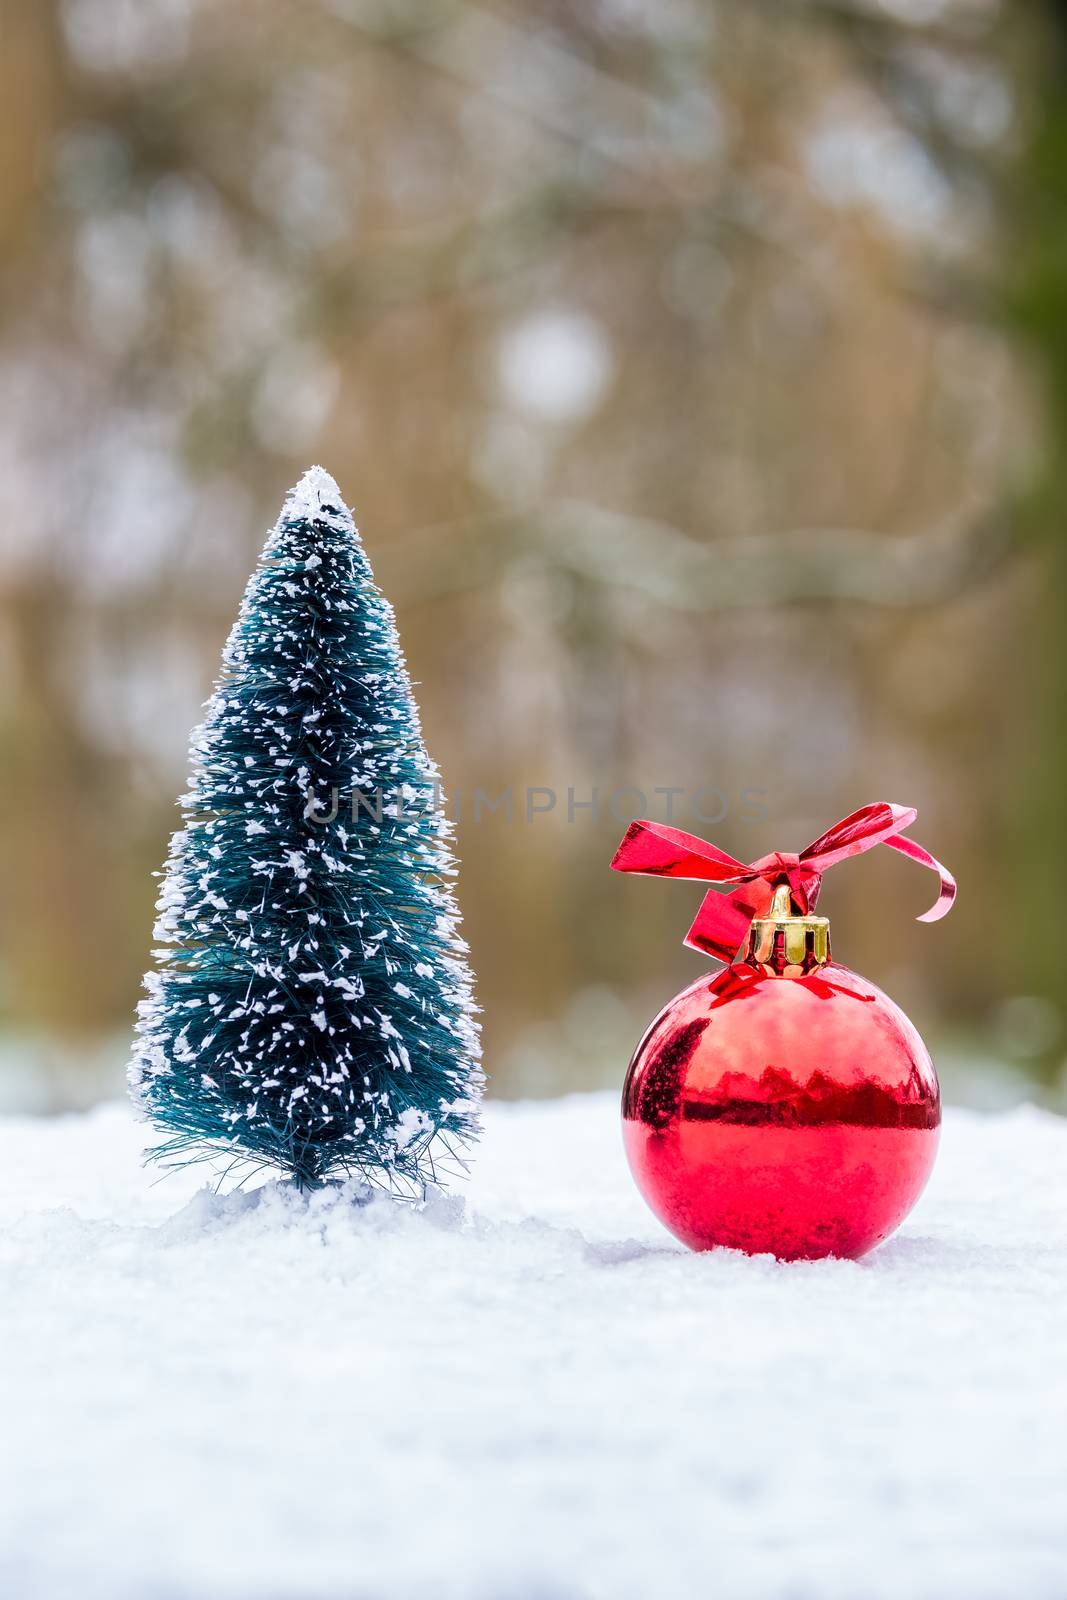 Little christmas tree with red bauble outdoors in snow by BenSchonewille